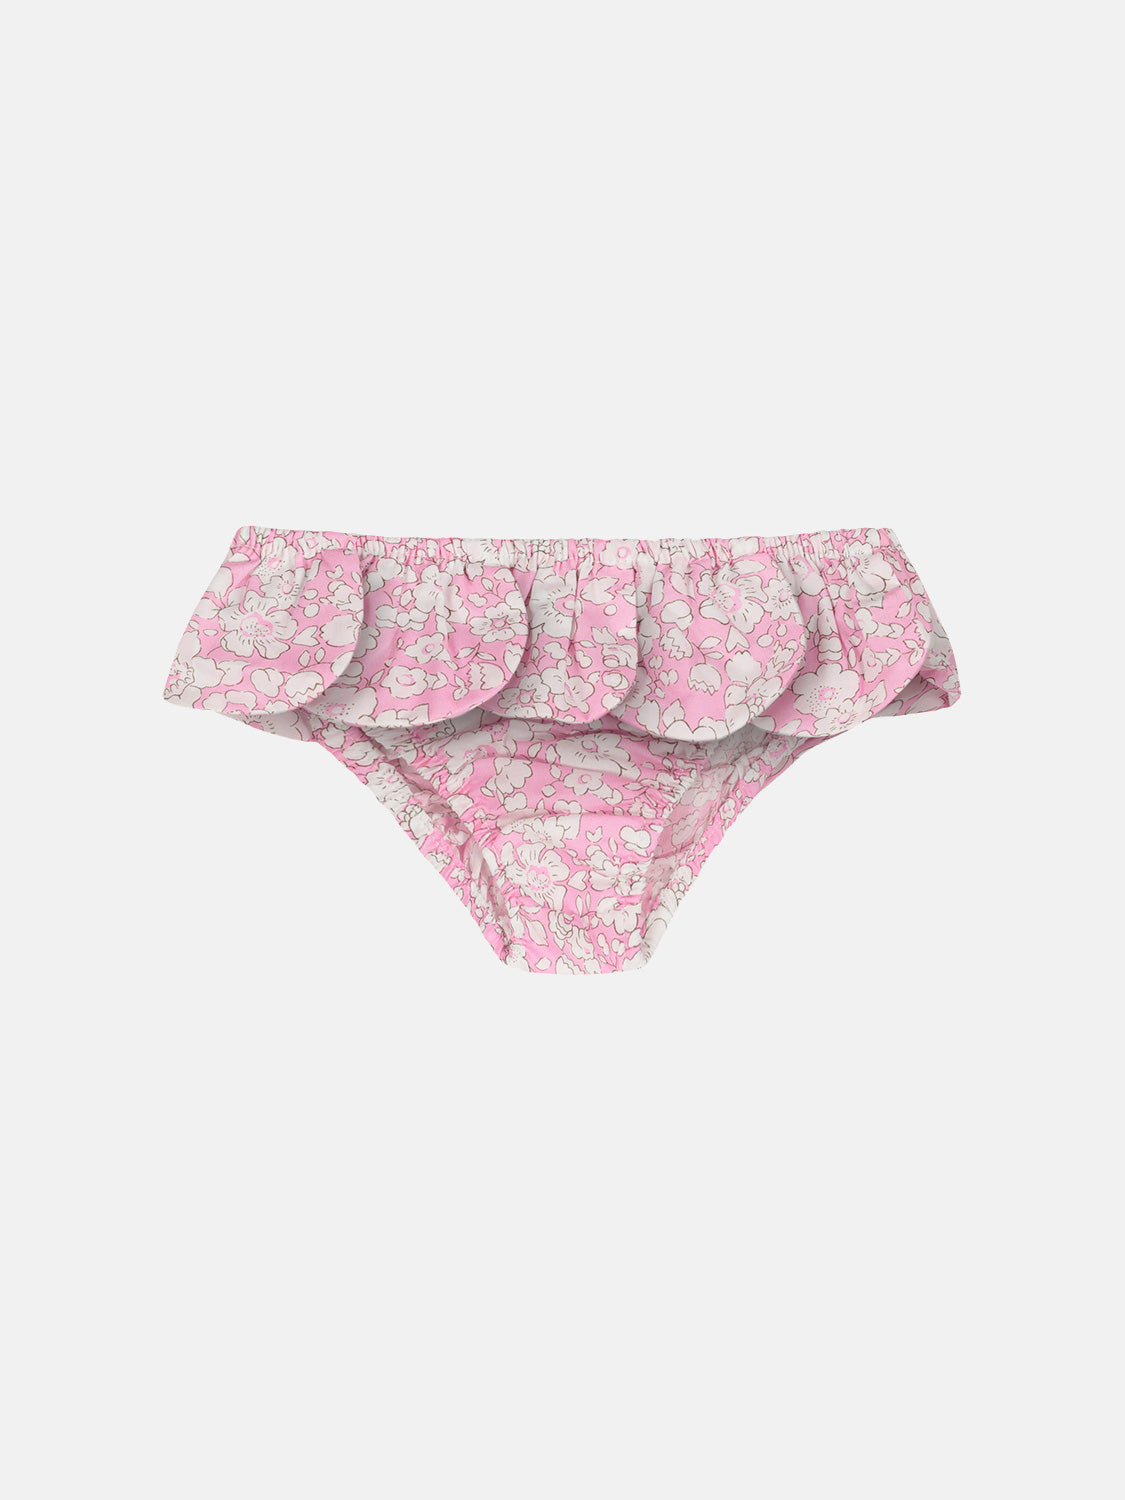 Petals Liberty Betsy Boo Pink Swimsuit